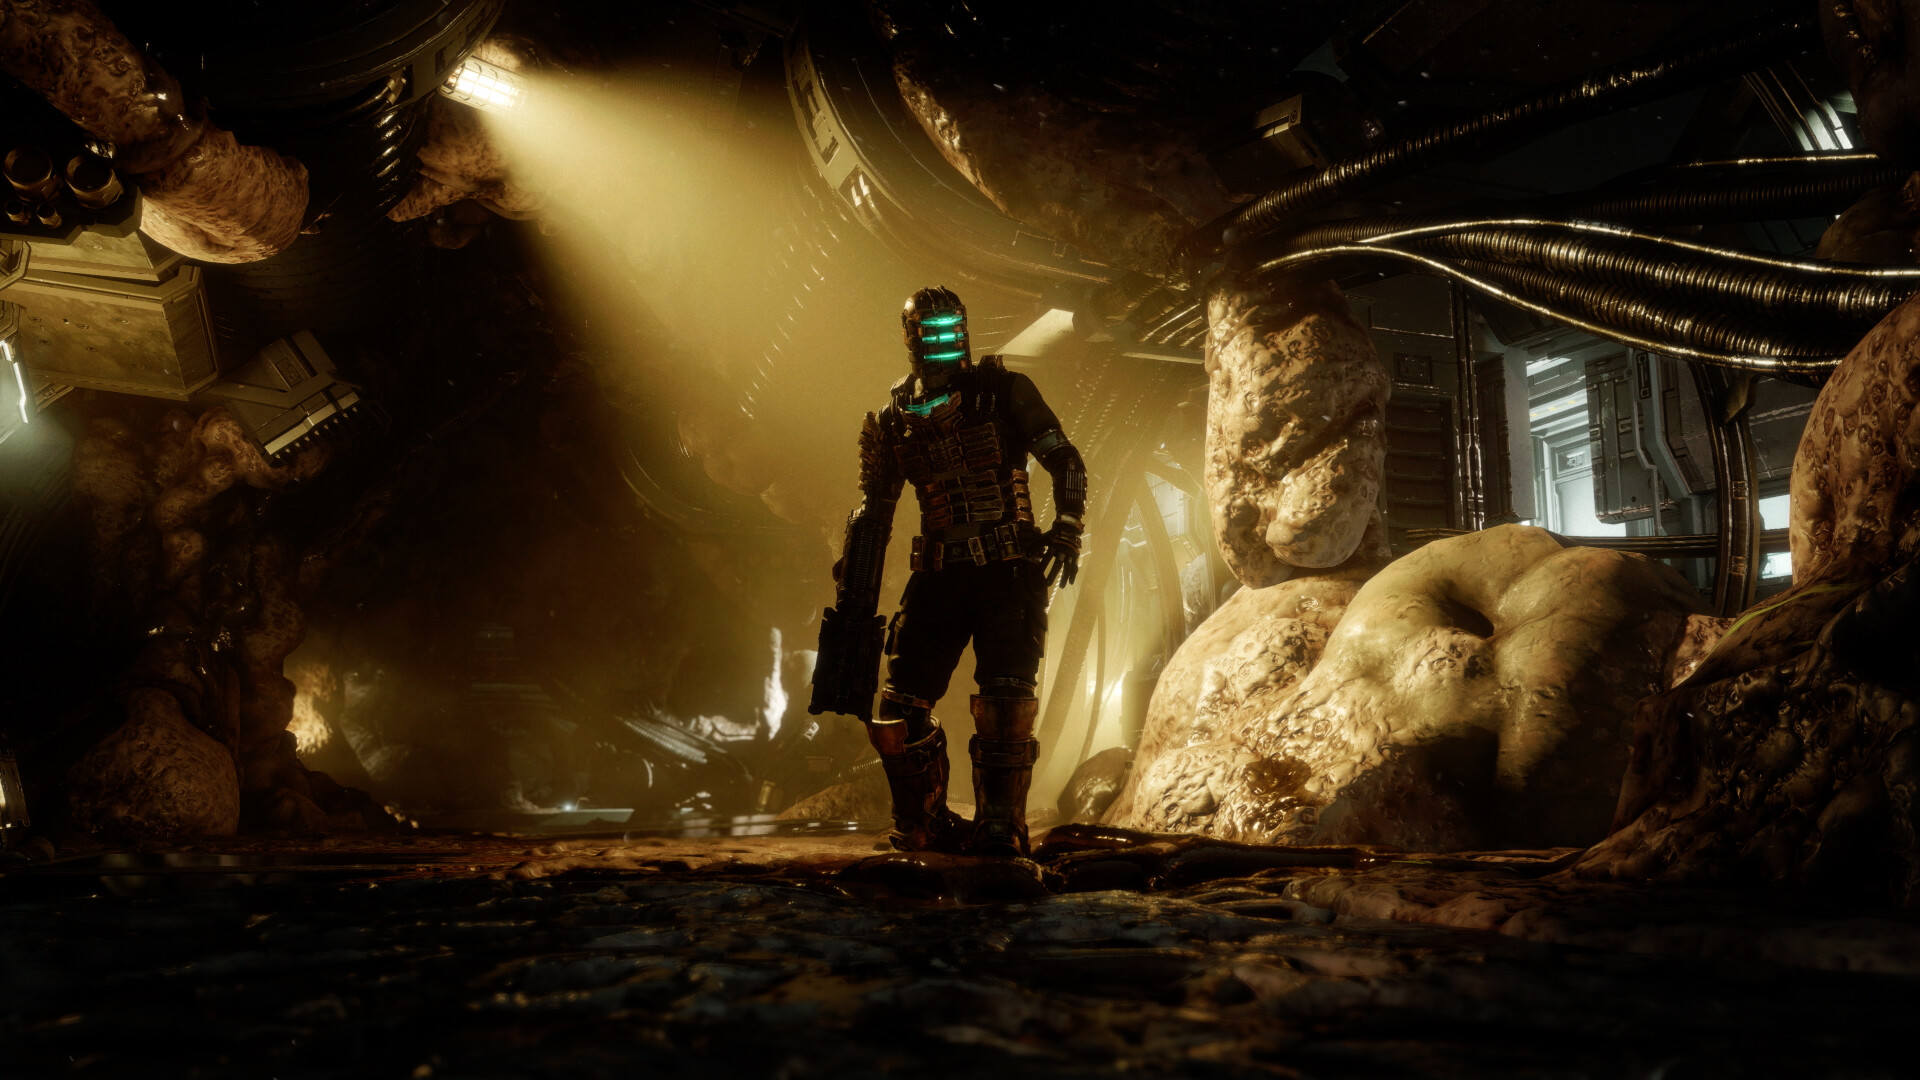 Undead ahead! 7 tips for getting the most out of 'Dead Space 3